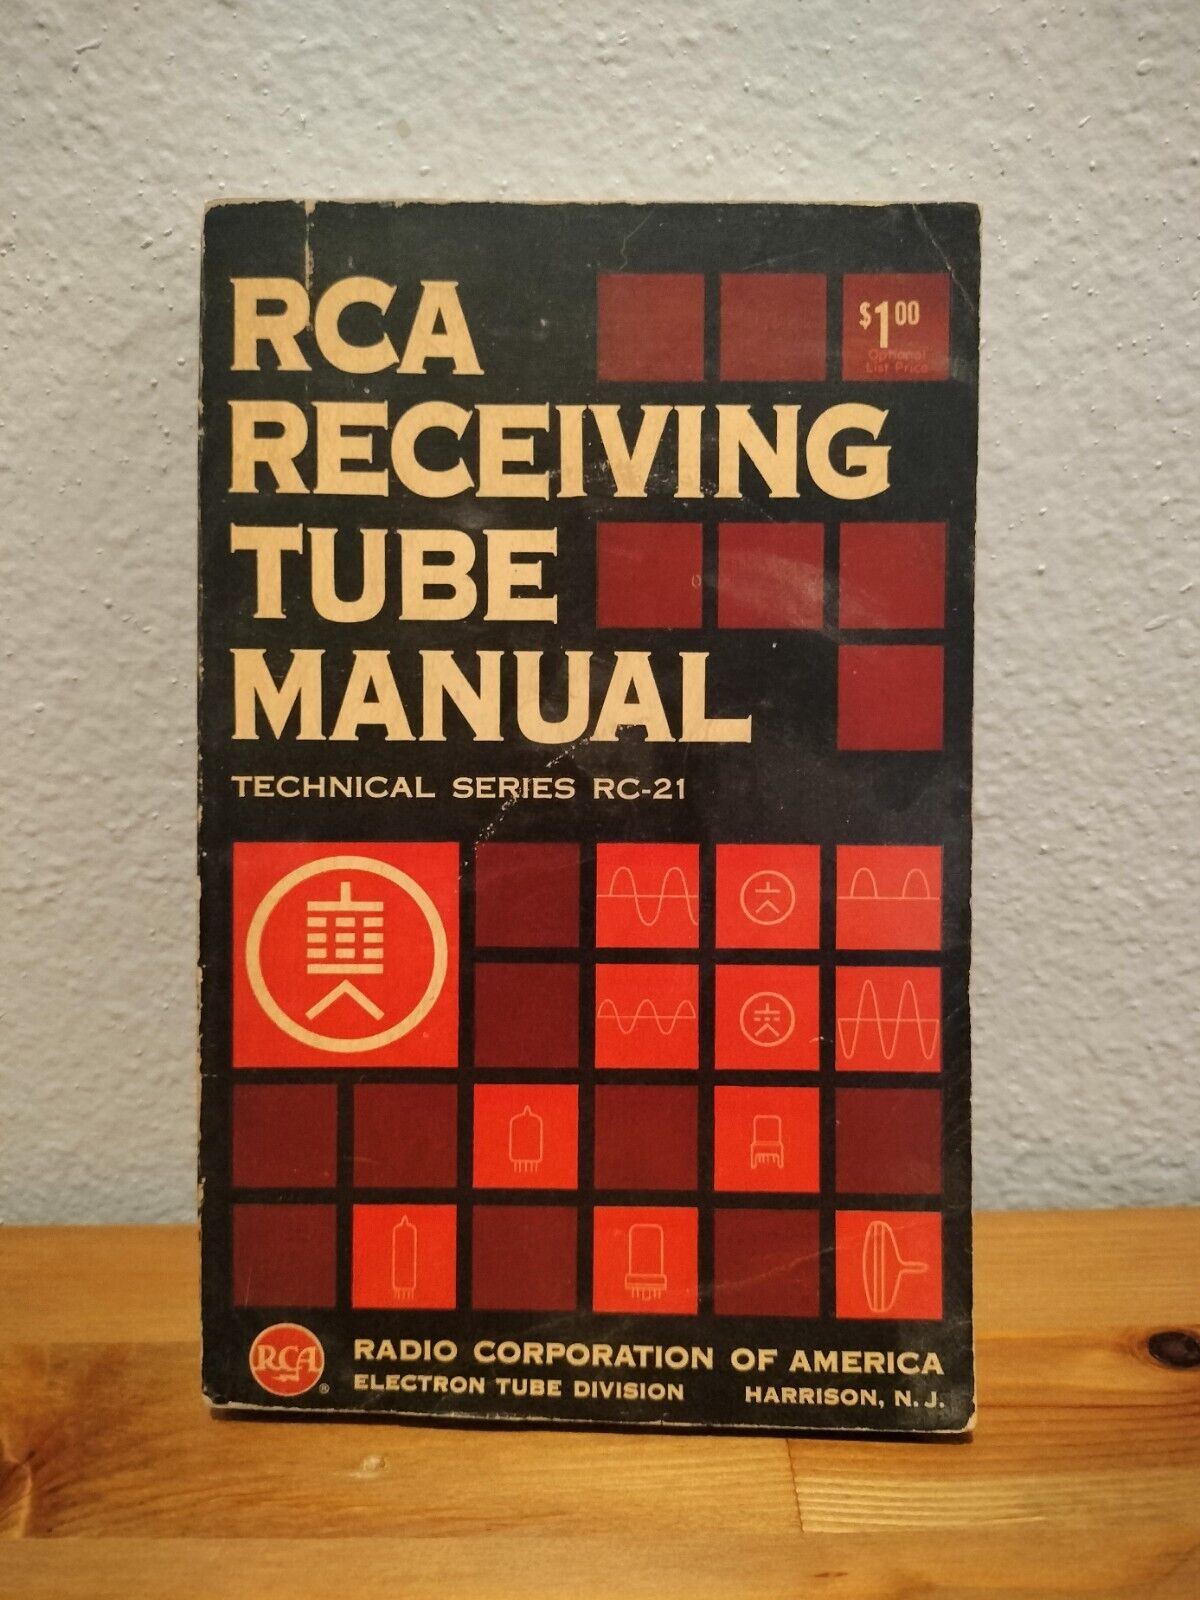 Vintage 60s RCA Receiving Tube Manual: Technical Series RC-21 (1961) 